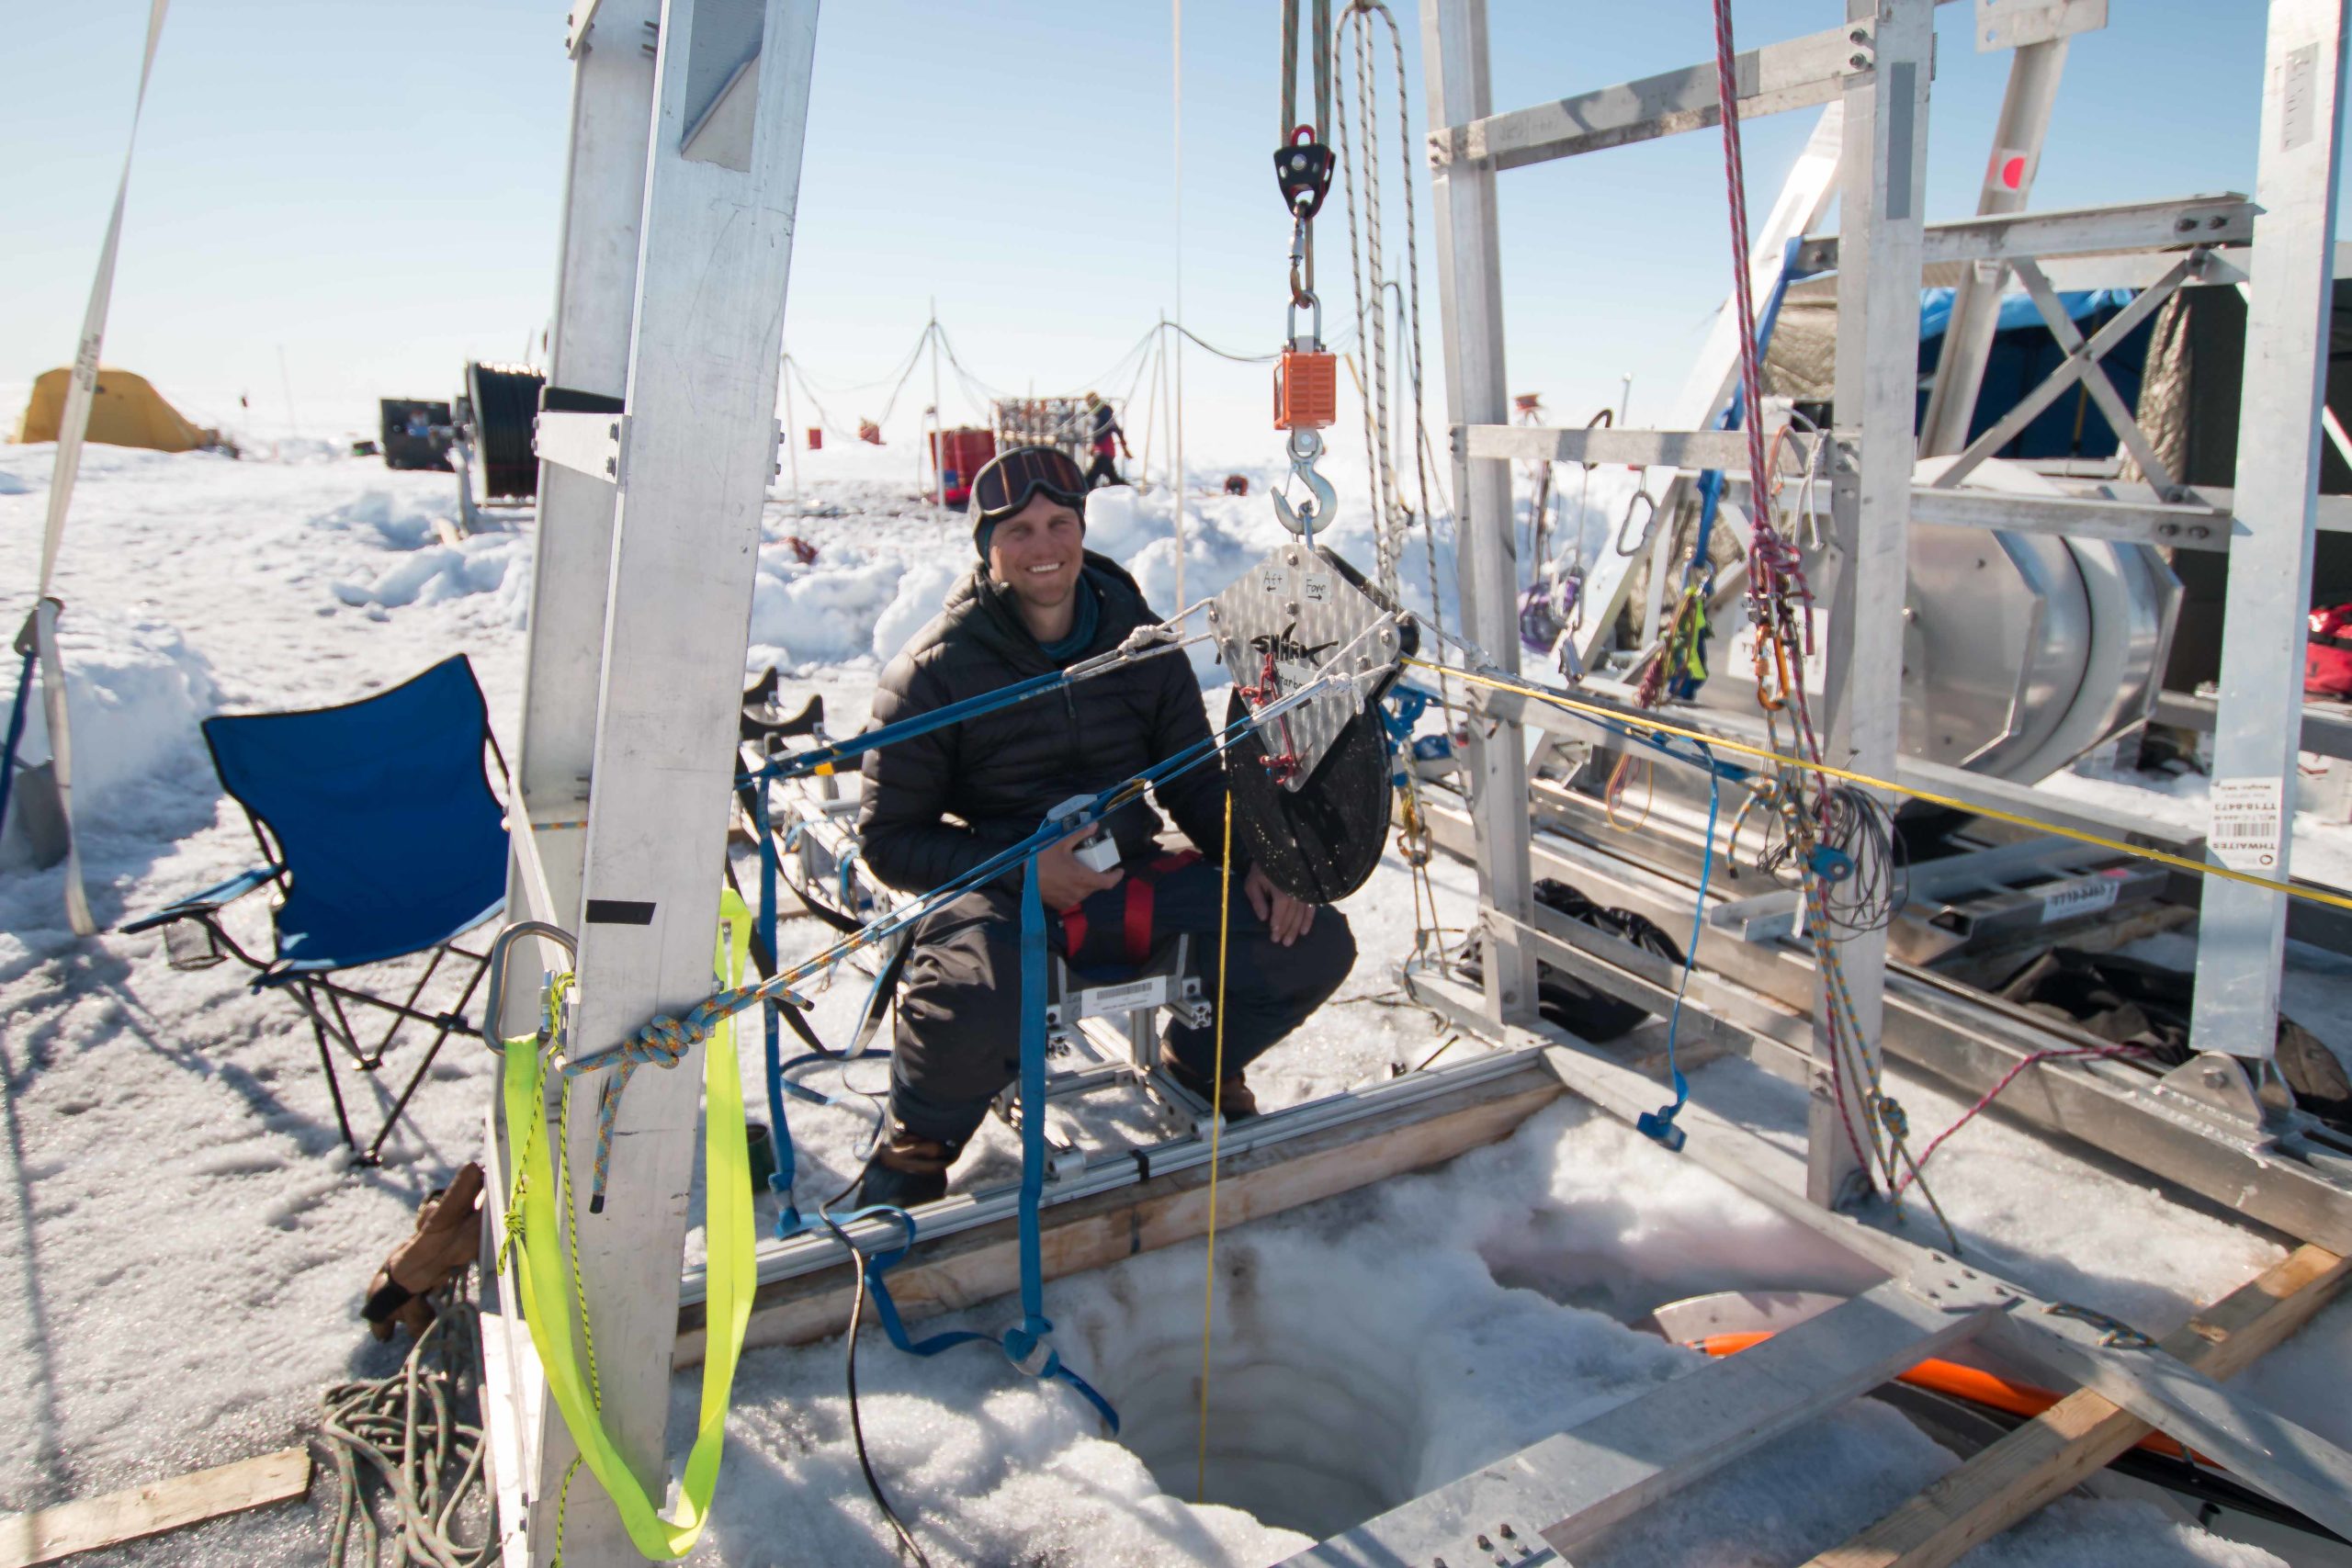 Andy Mullen ran outside operations for the Icefin dives, including managing the fiber optic tether down to the vehicle.